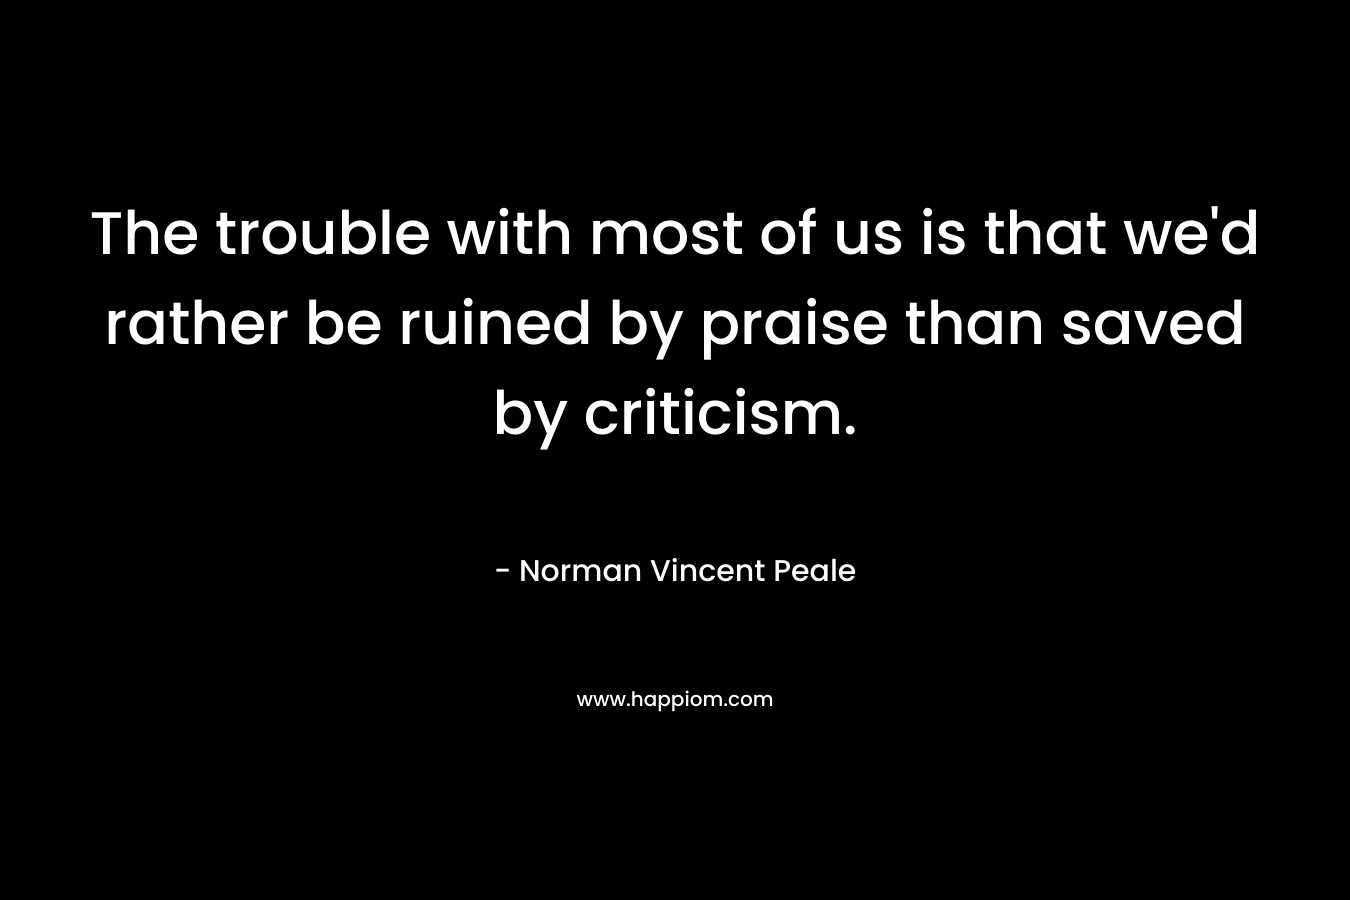 The trouble with most of us is that we’d rather be ruined by praise than saved by criticism. – Norman Vincent Peale